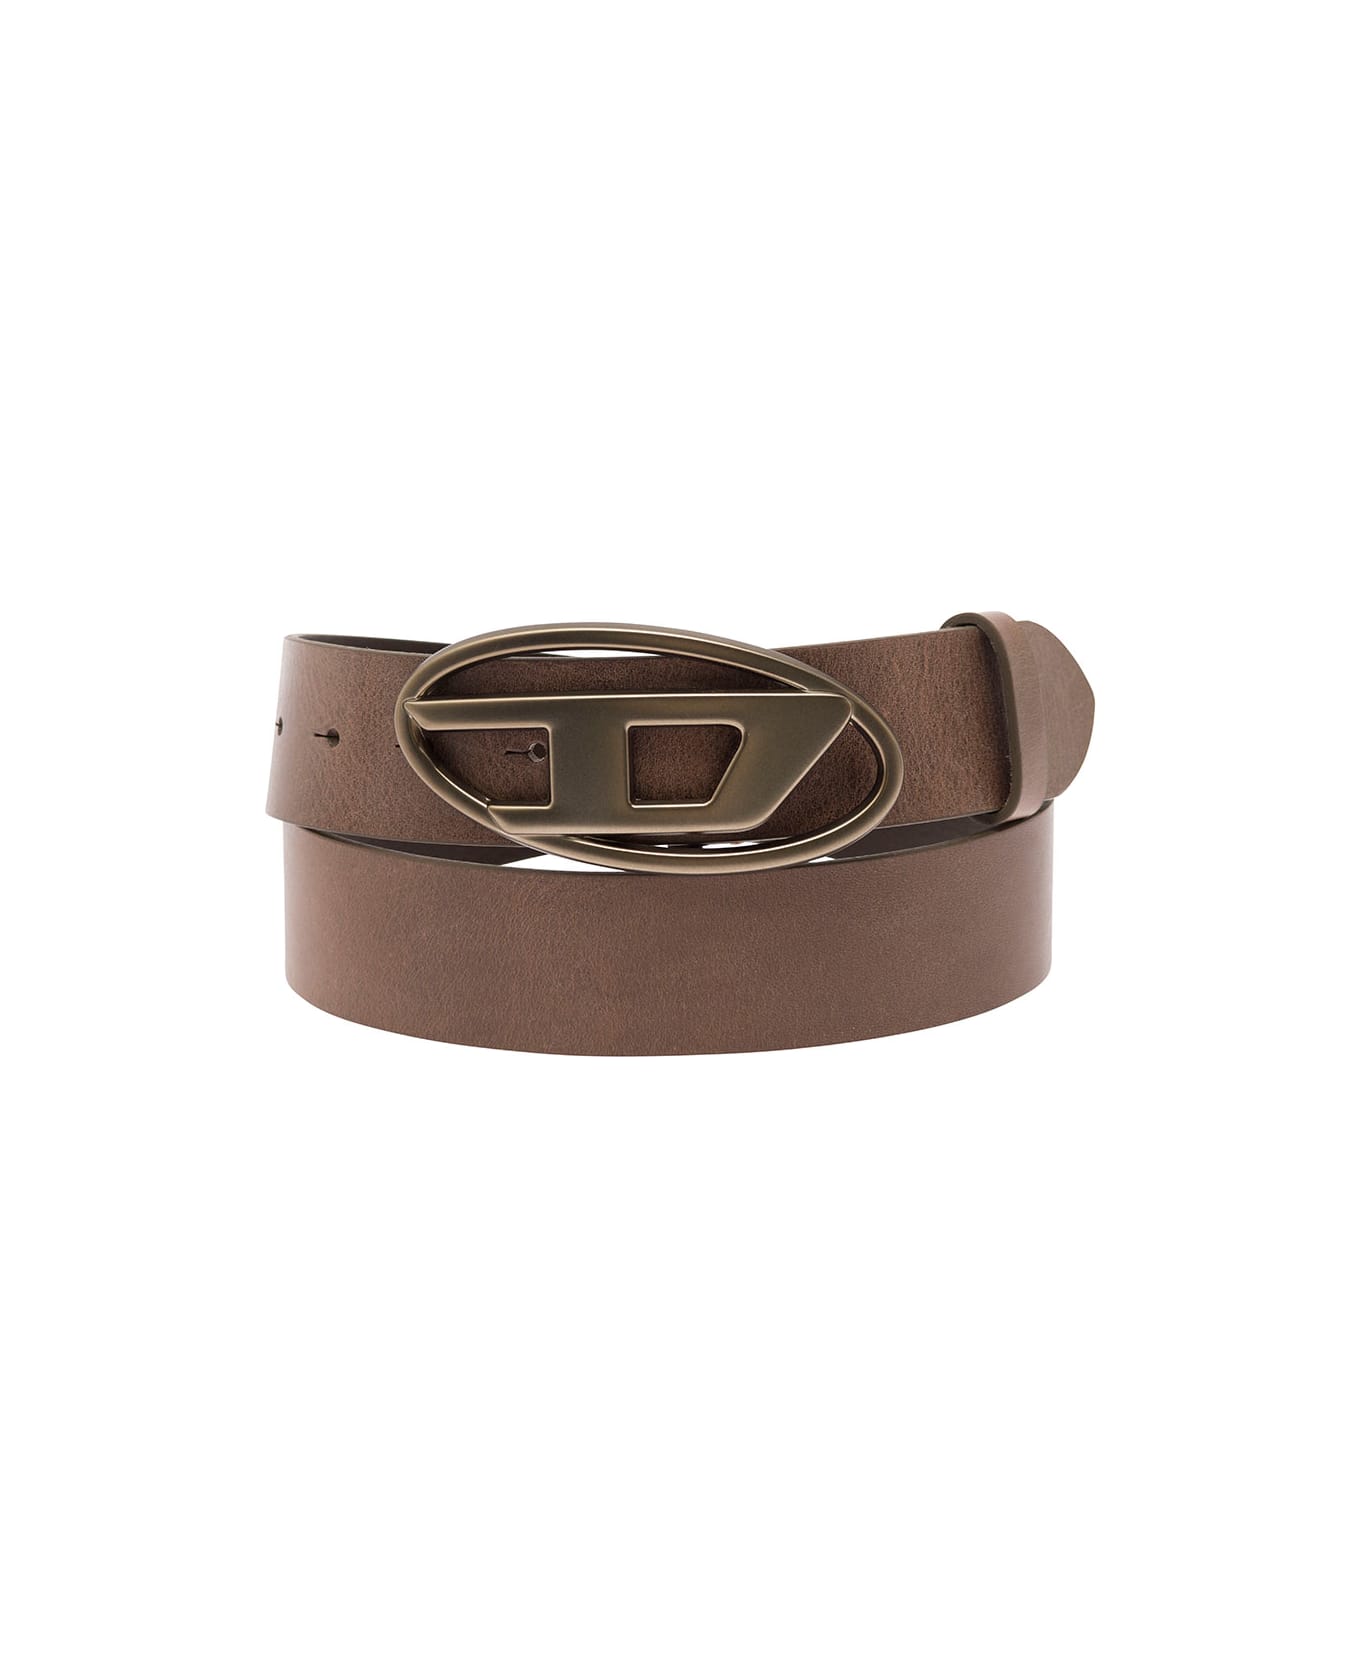 Diesel 'b-1dr' Brown Belt With Oval D Buckle In Leather Man - Brown ベルト